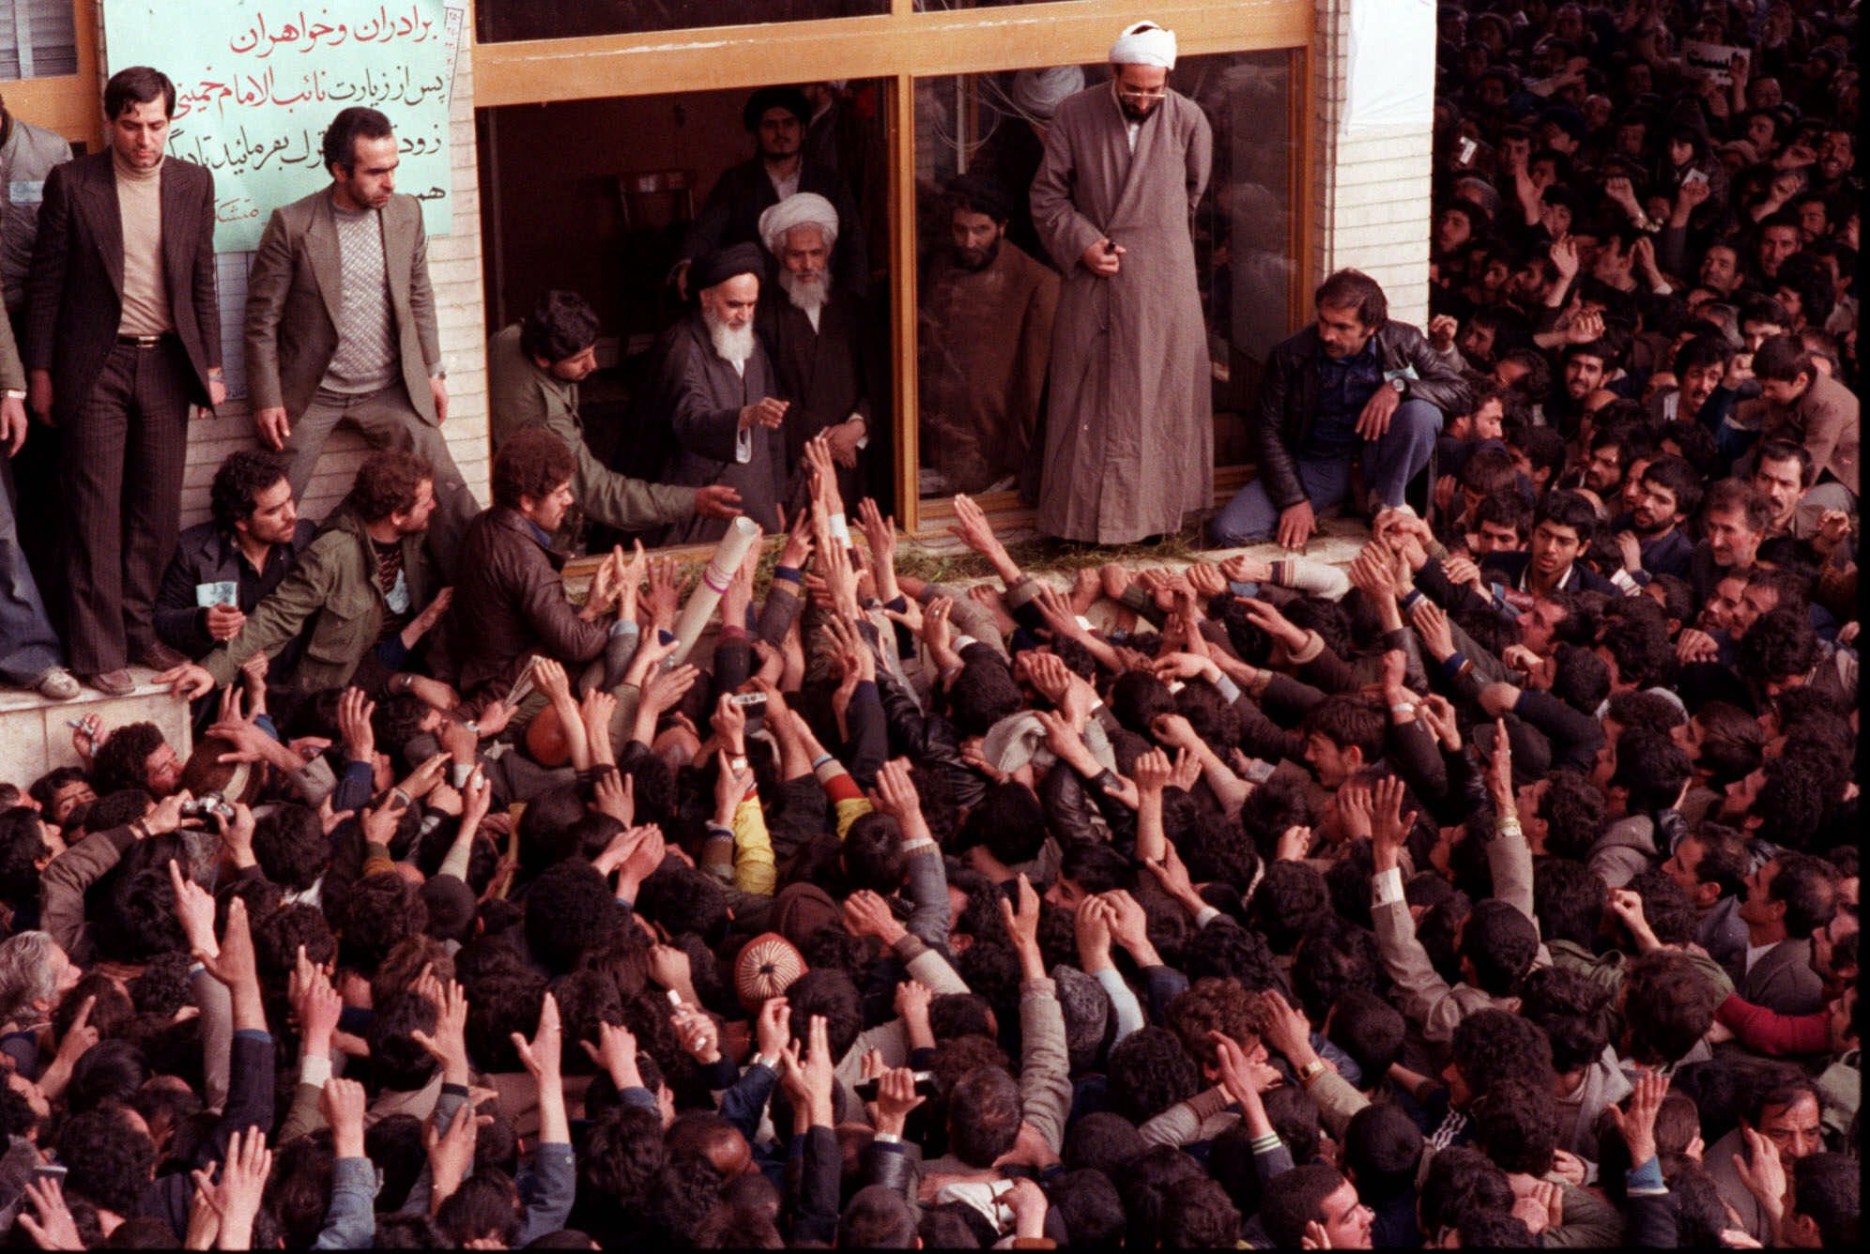 The late Ayatollah Ruhollah Khomeini, center, is greeted by supporters after arriving at the airport in Tehran Iran in this Feb. 1, 1979 photo. Monday Feb. 1, 1999 is the 20th anniversary of Khomeini's return from exile to lead the Islamic revolution in his country.  ( AP Photo )